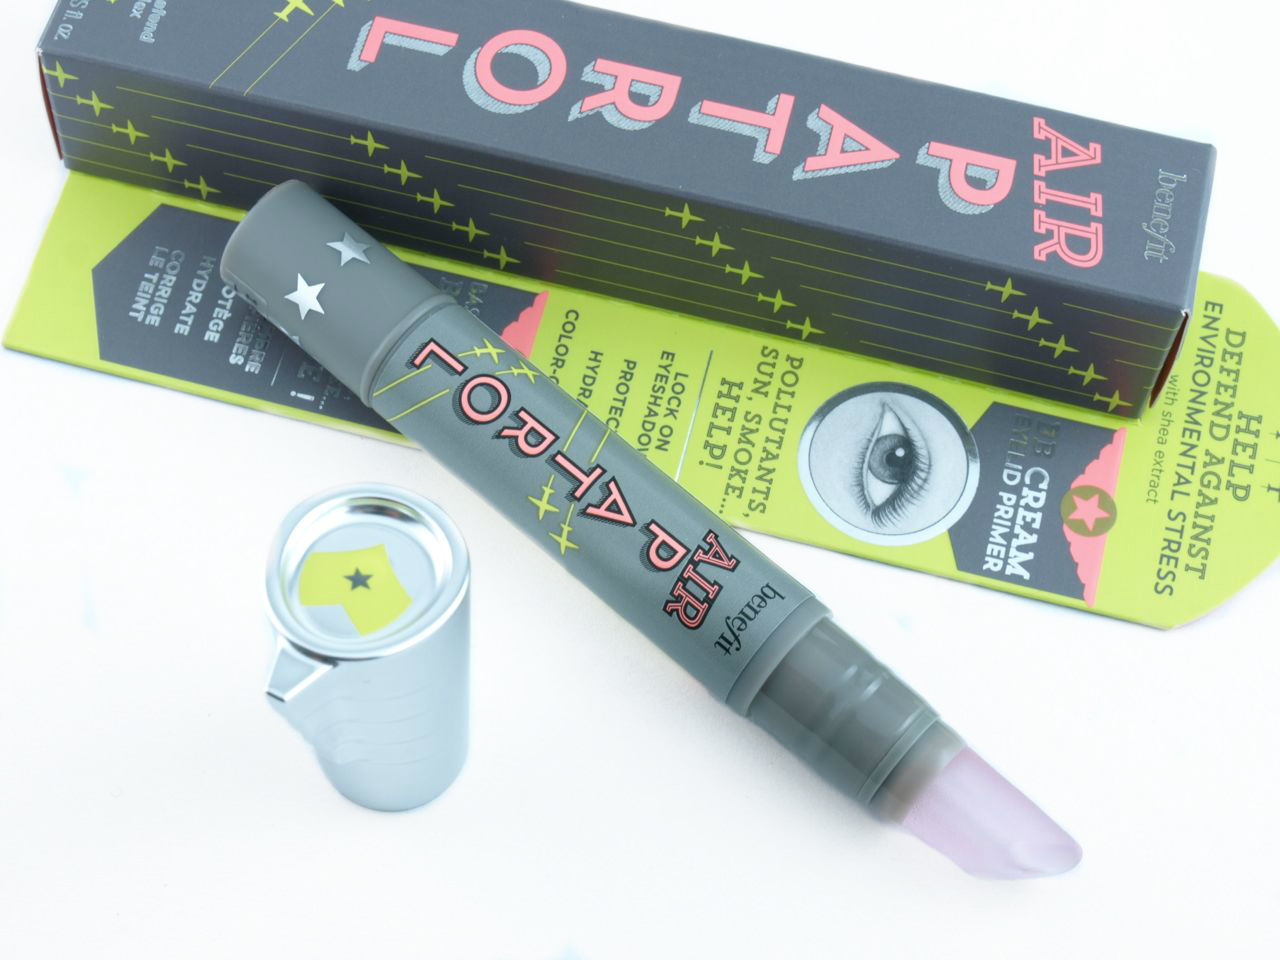 Benefit Air Patrol BB Cream Eyelid Primer: Review and Swatches